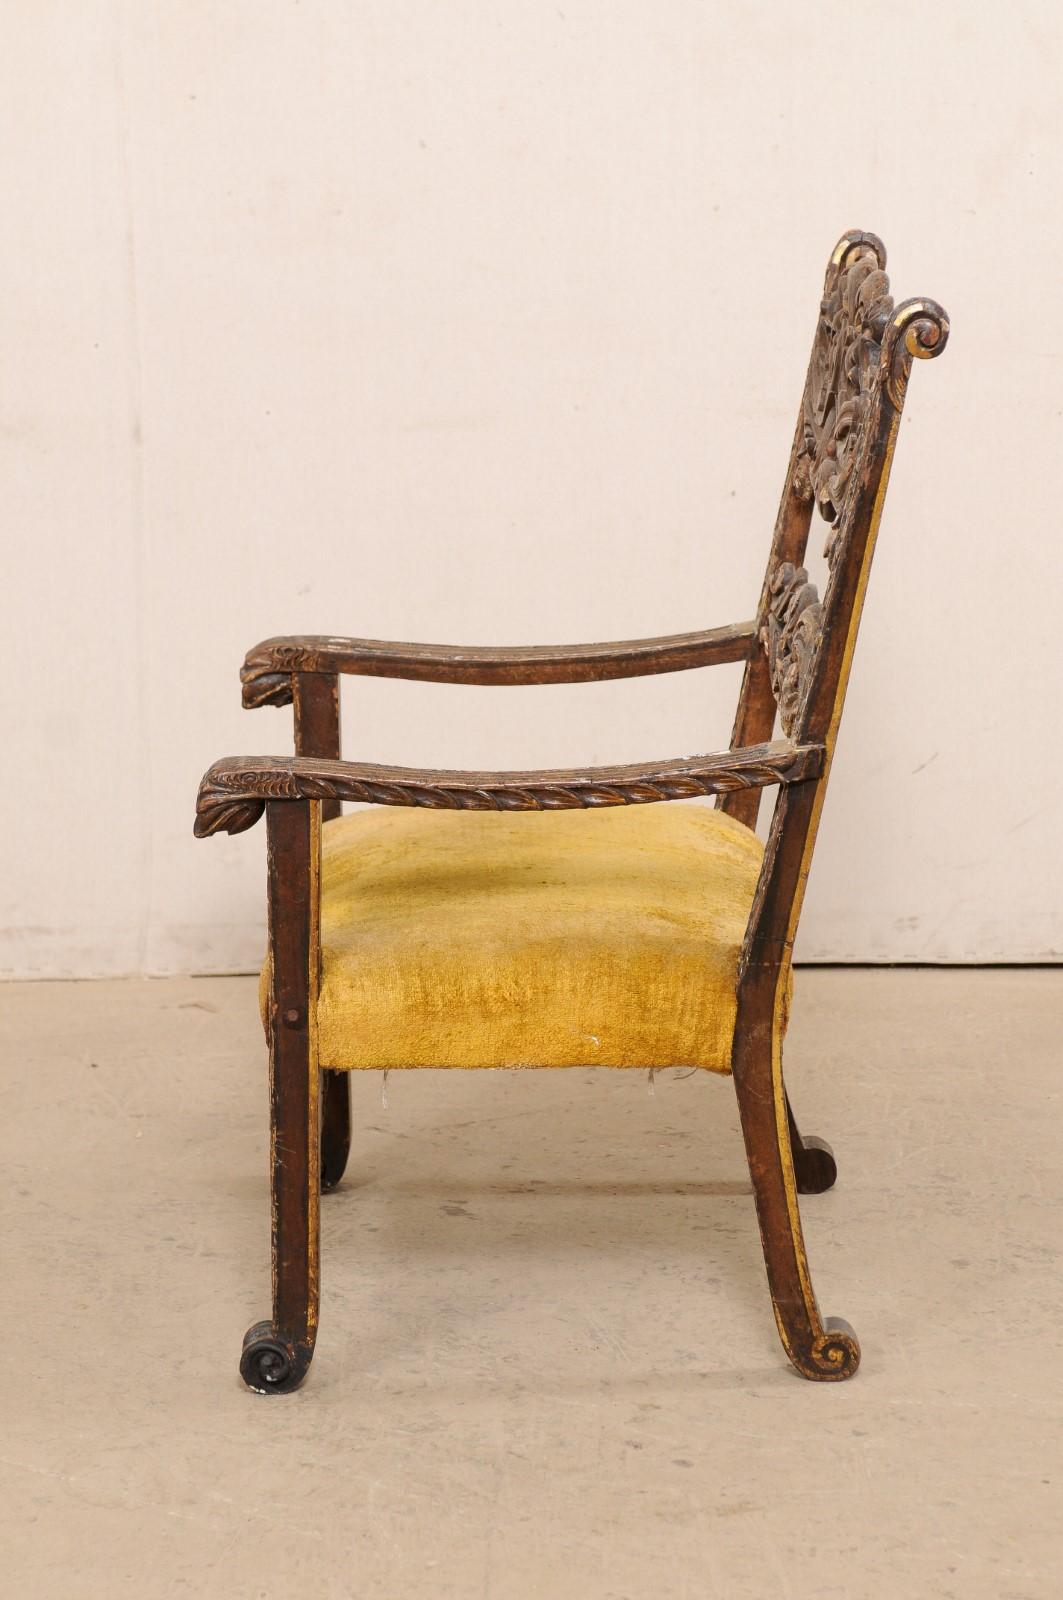 Handsome 18th C Italian Baroque Arm Chair with Intricately Carved Details For Sale 2